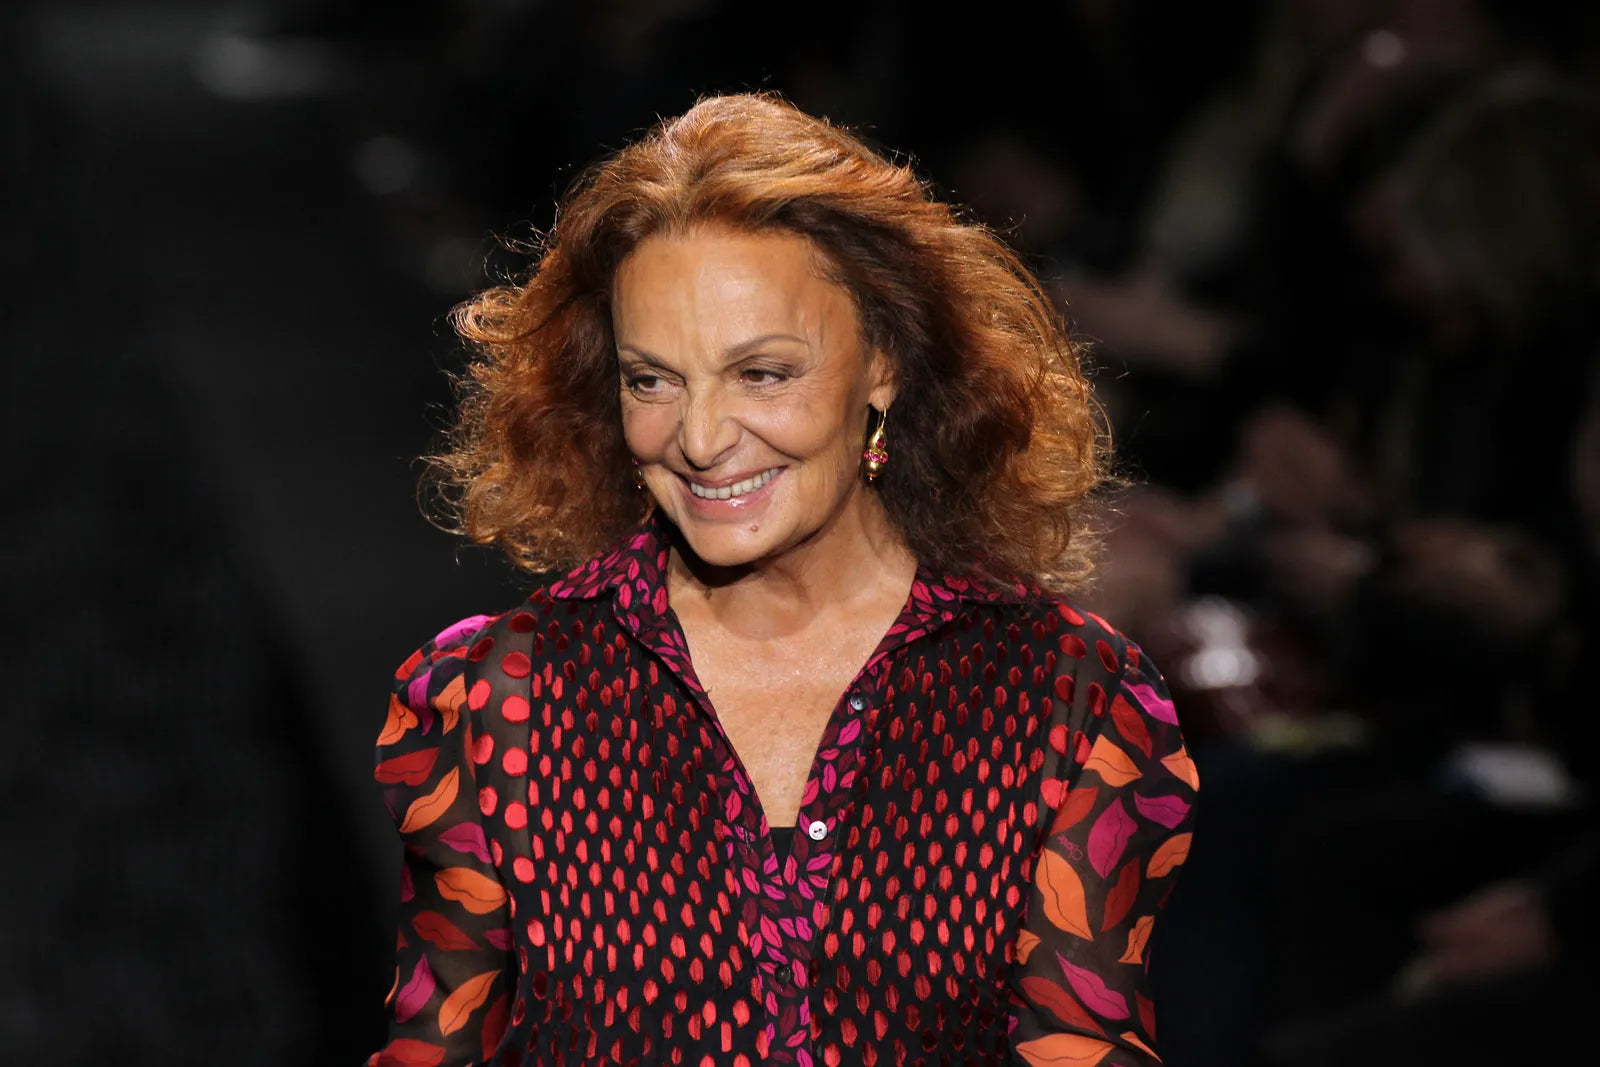 Diane von Furstenberg is synonymous with timeless elegance and bold femininity, renowned for her iconic wrap dresses and vibrant prints. From sophisticated separates to statement accessories, DVF's collections exude effortless style and confidence. 